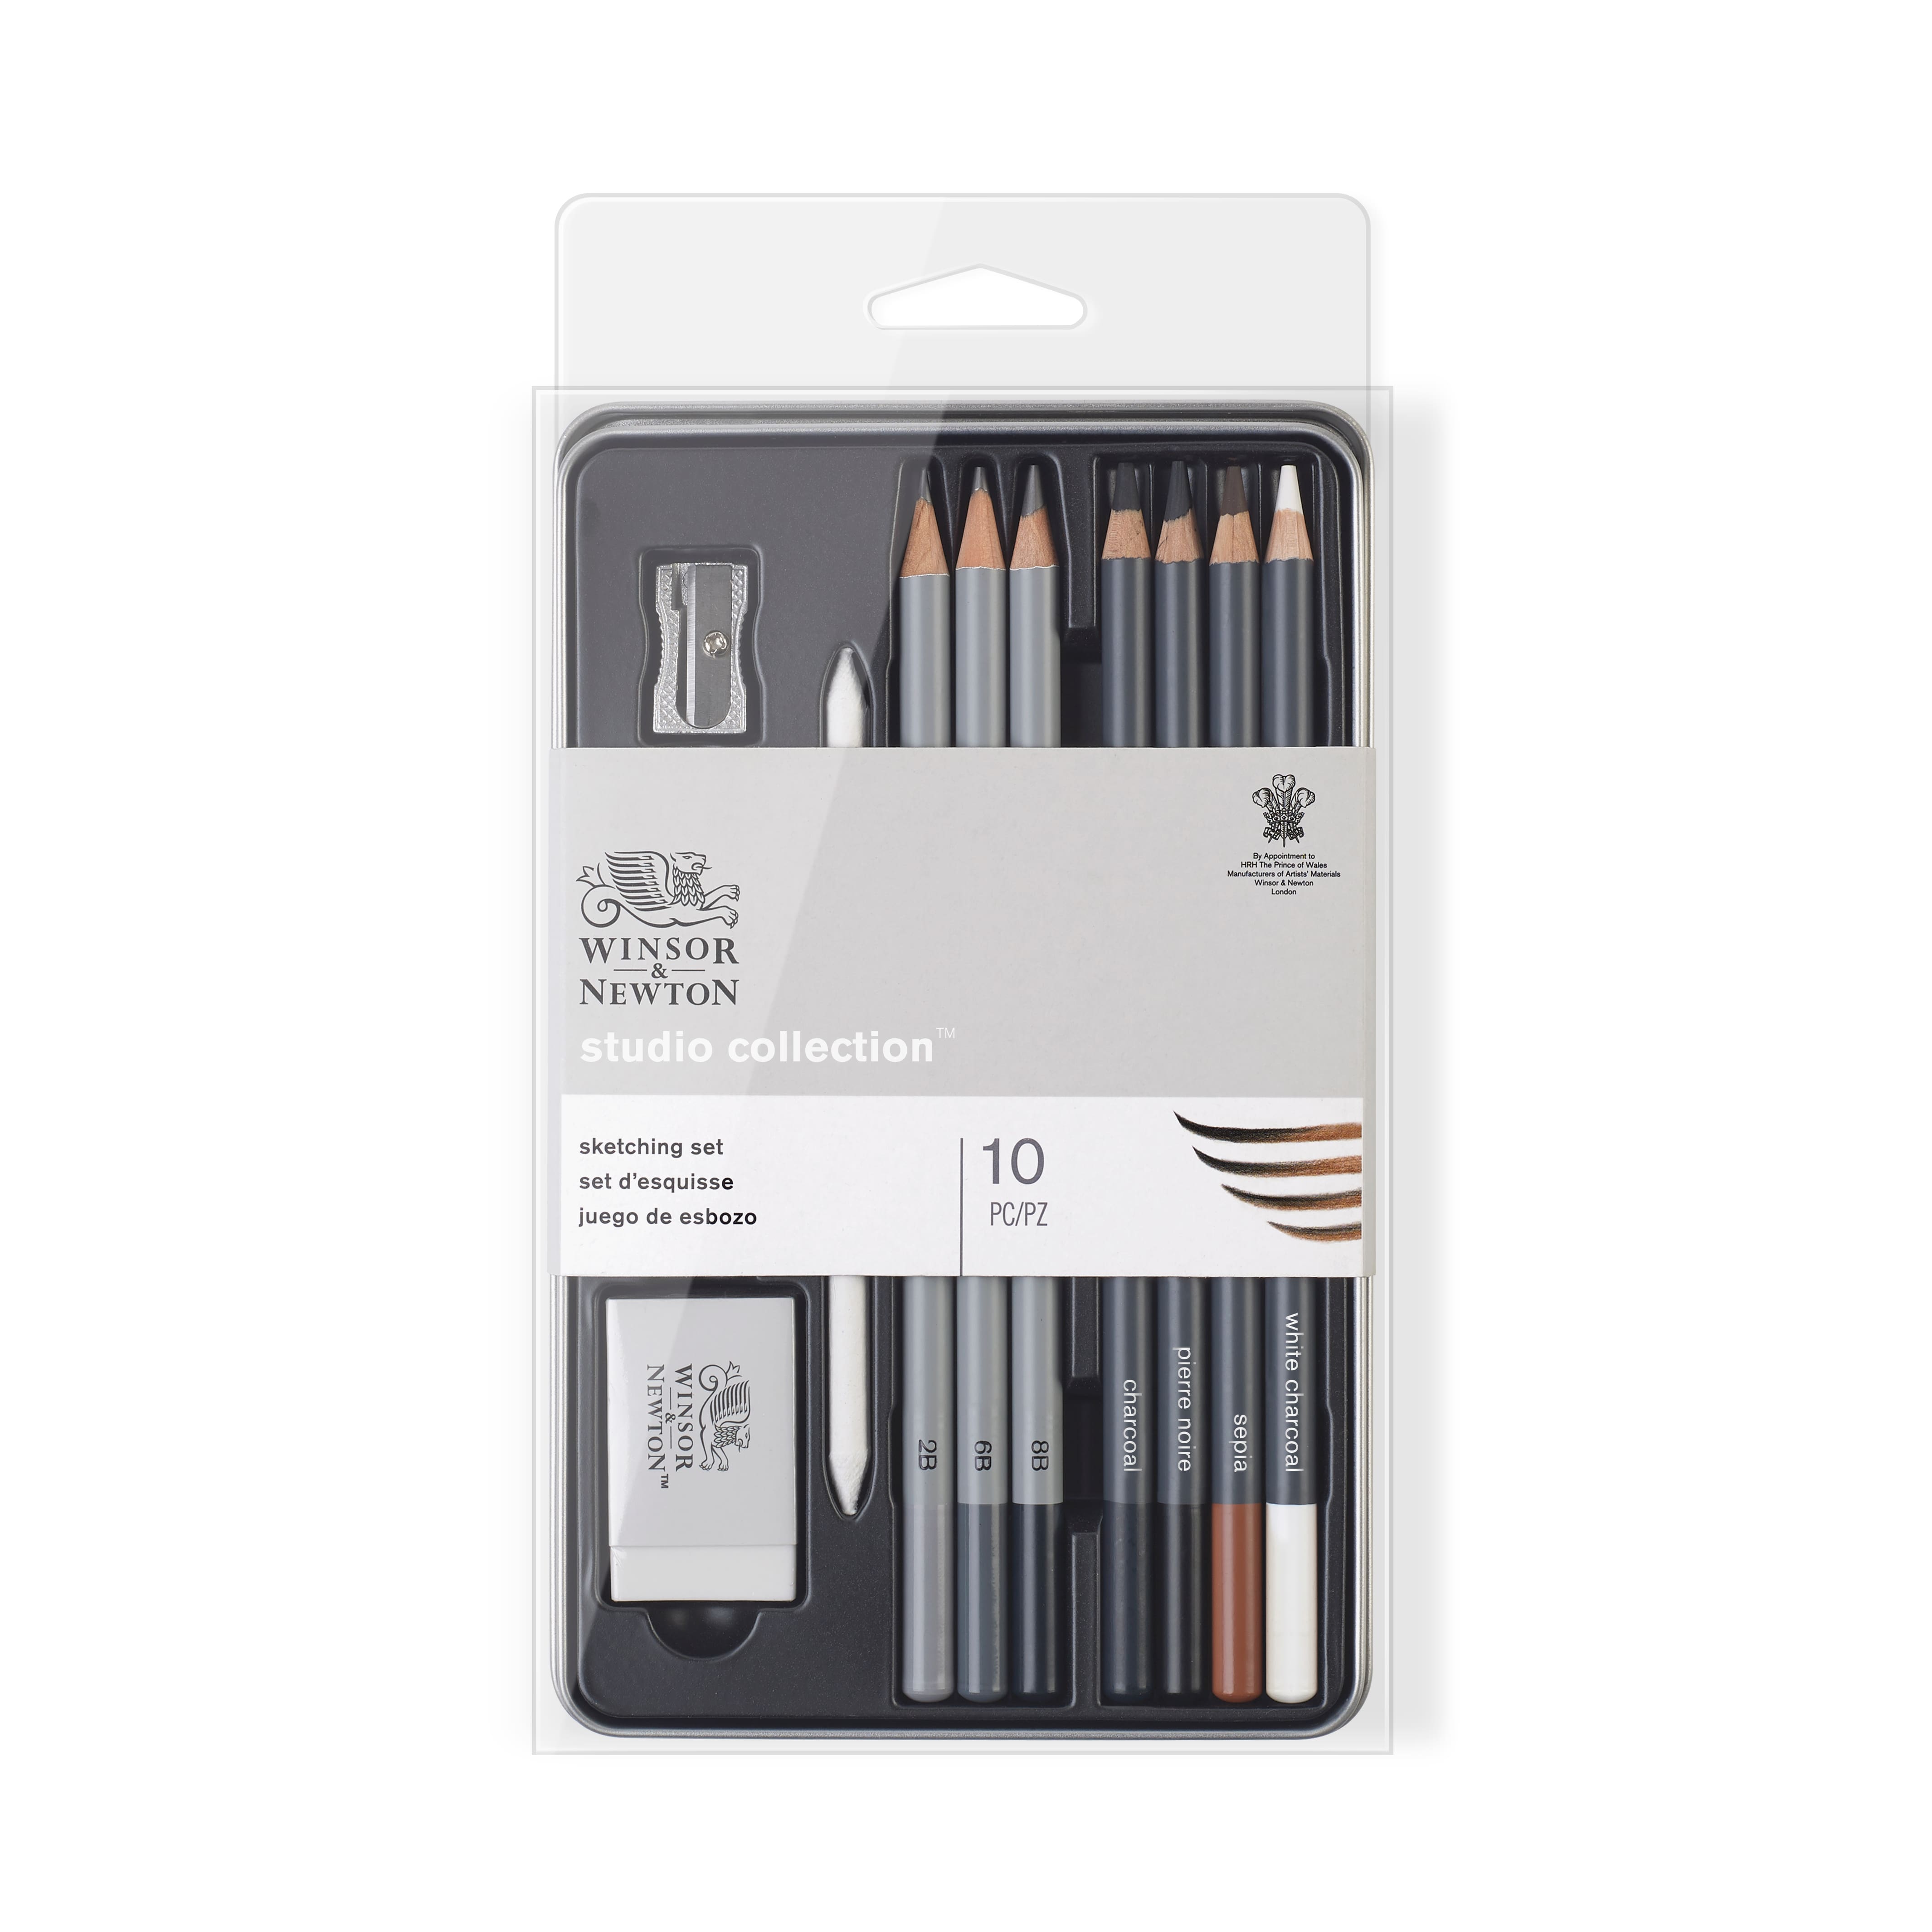 12 Packs: 22 Ct. (264 total) Fundamentals Drawing & Sketching Pencils by Artist's Loft